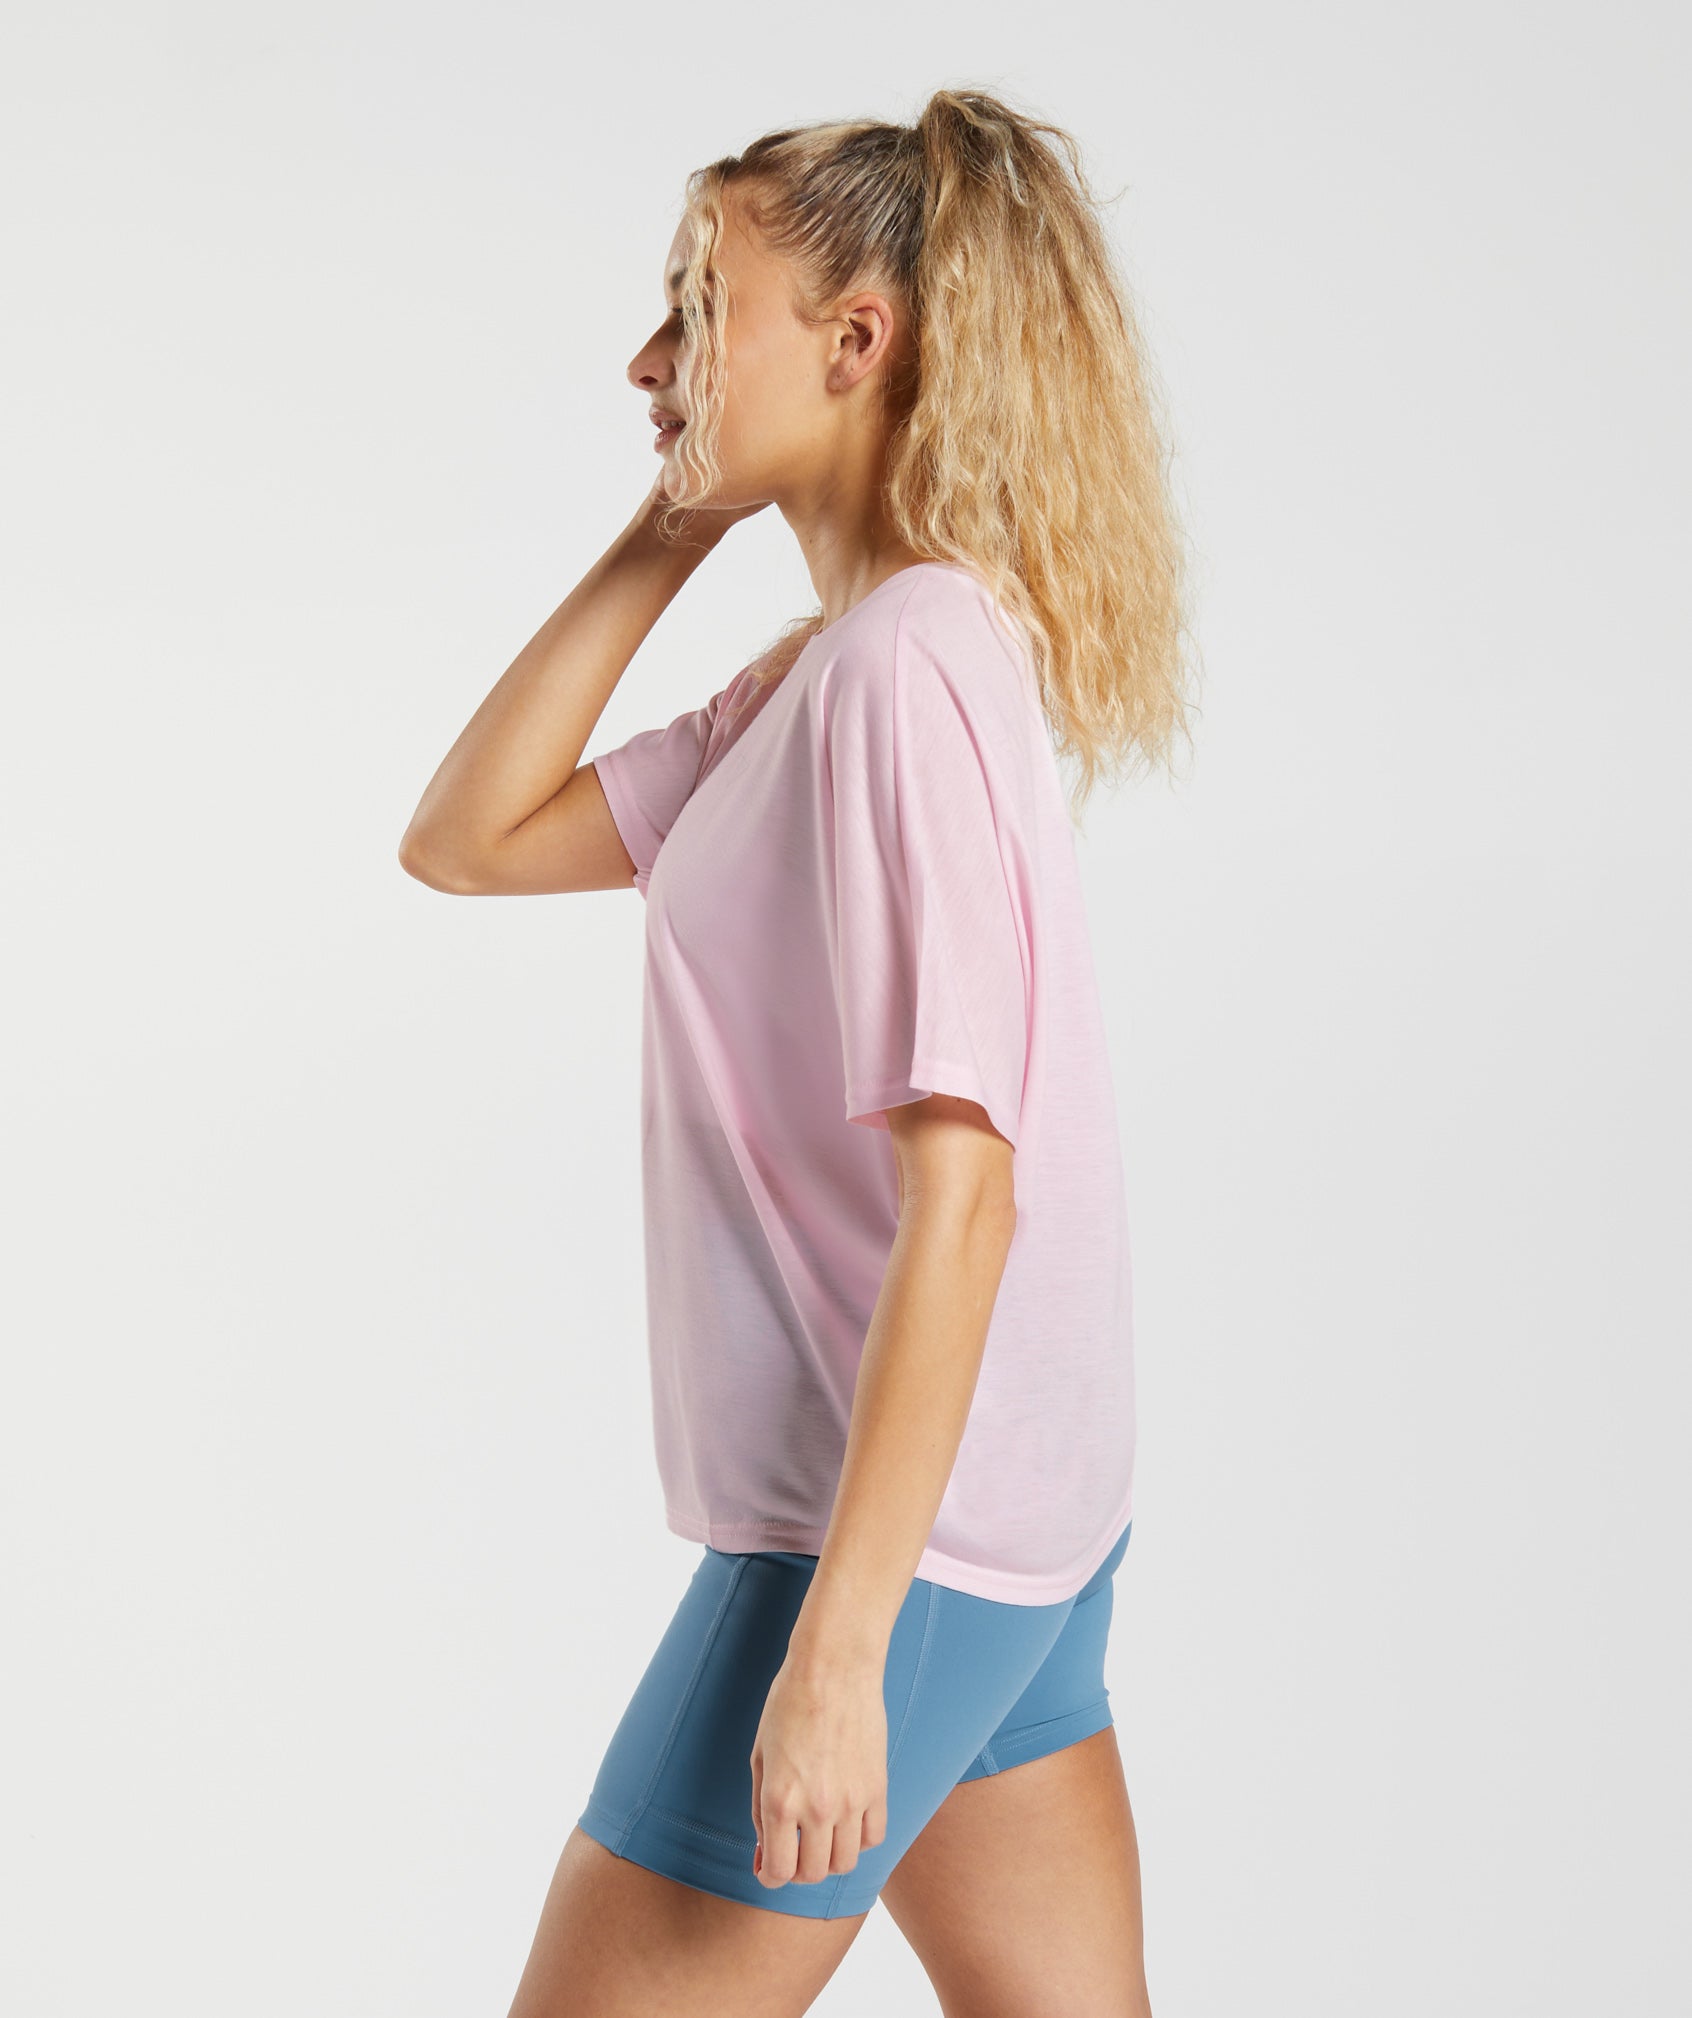 Super Soft T-Shirt in Chalk Pink - view 3